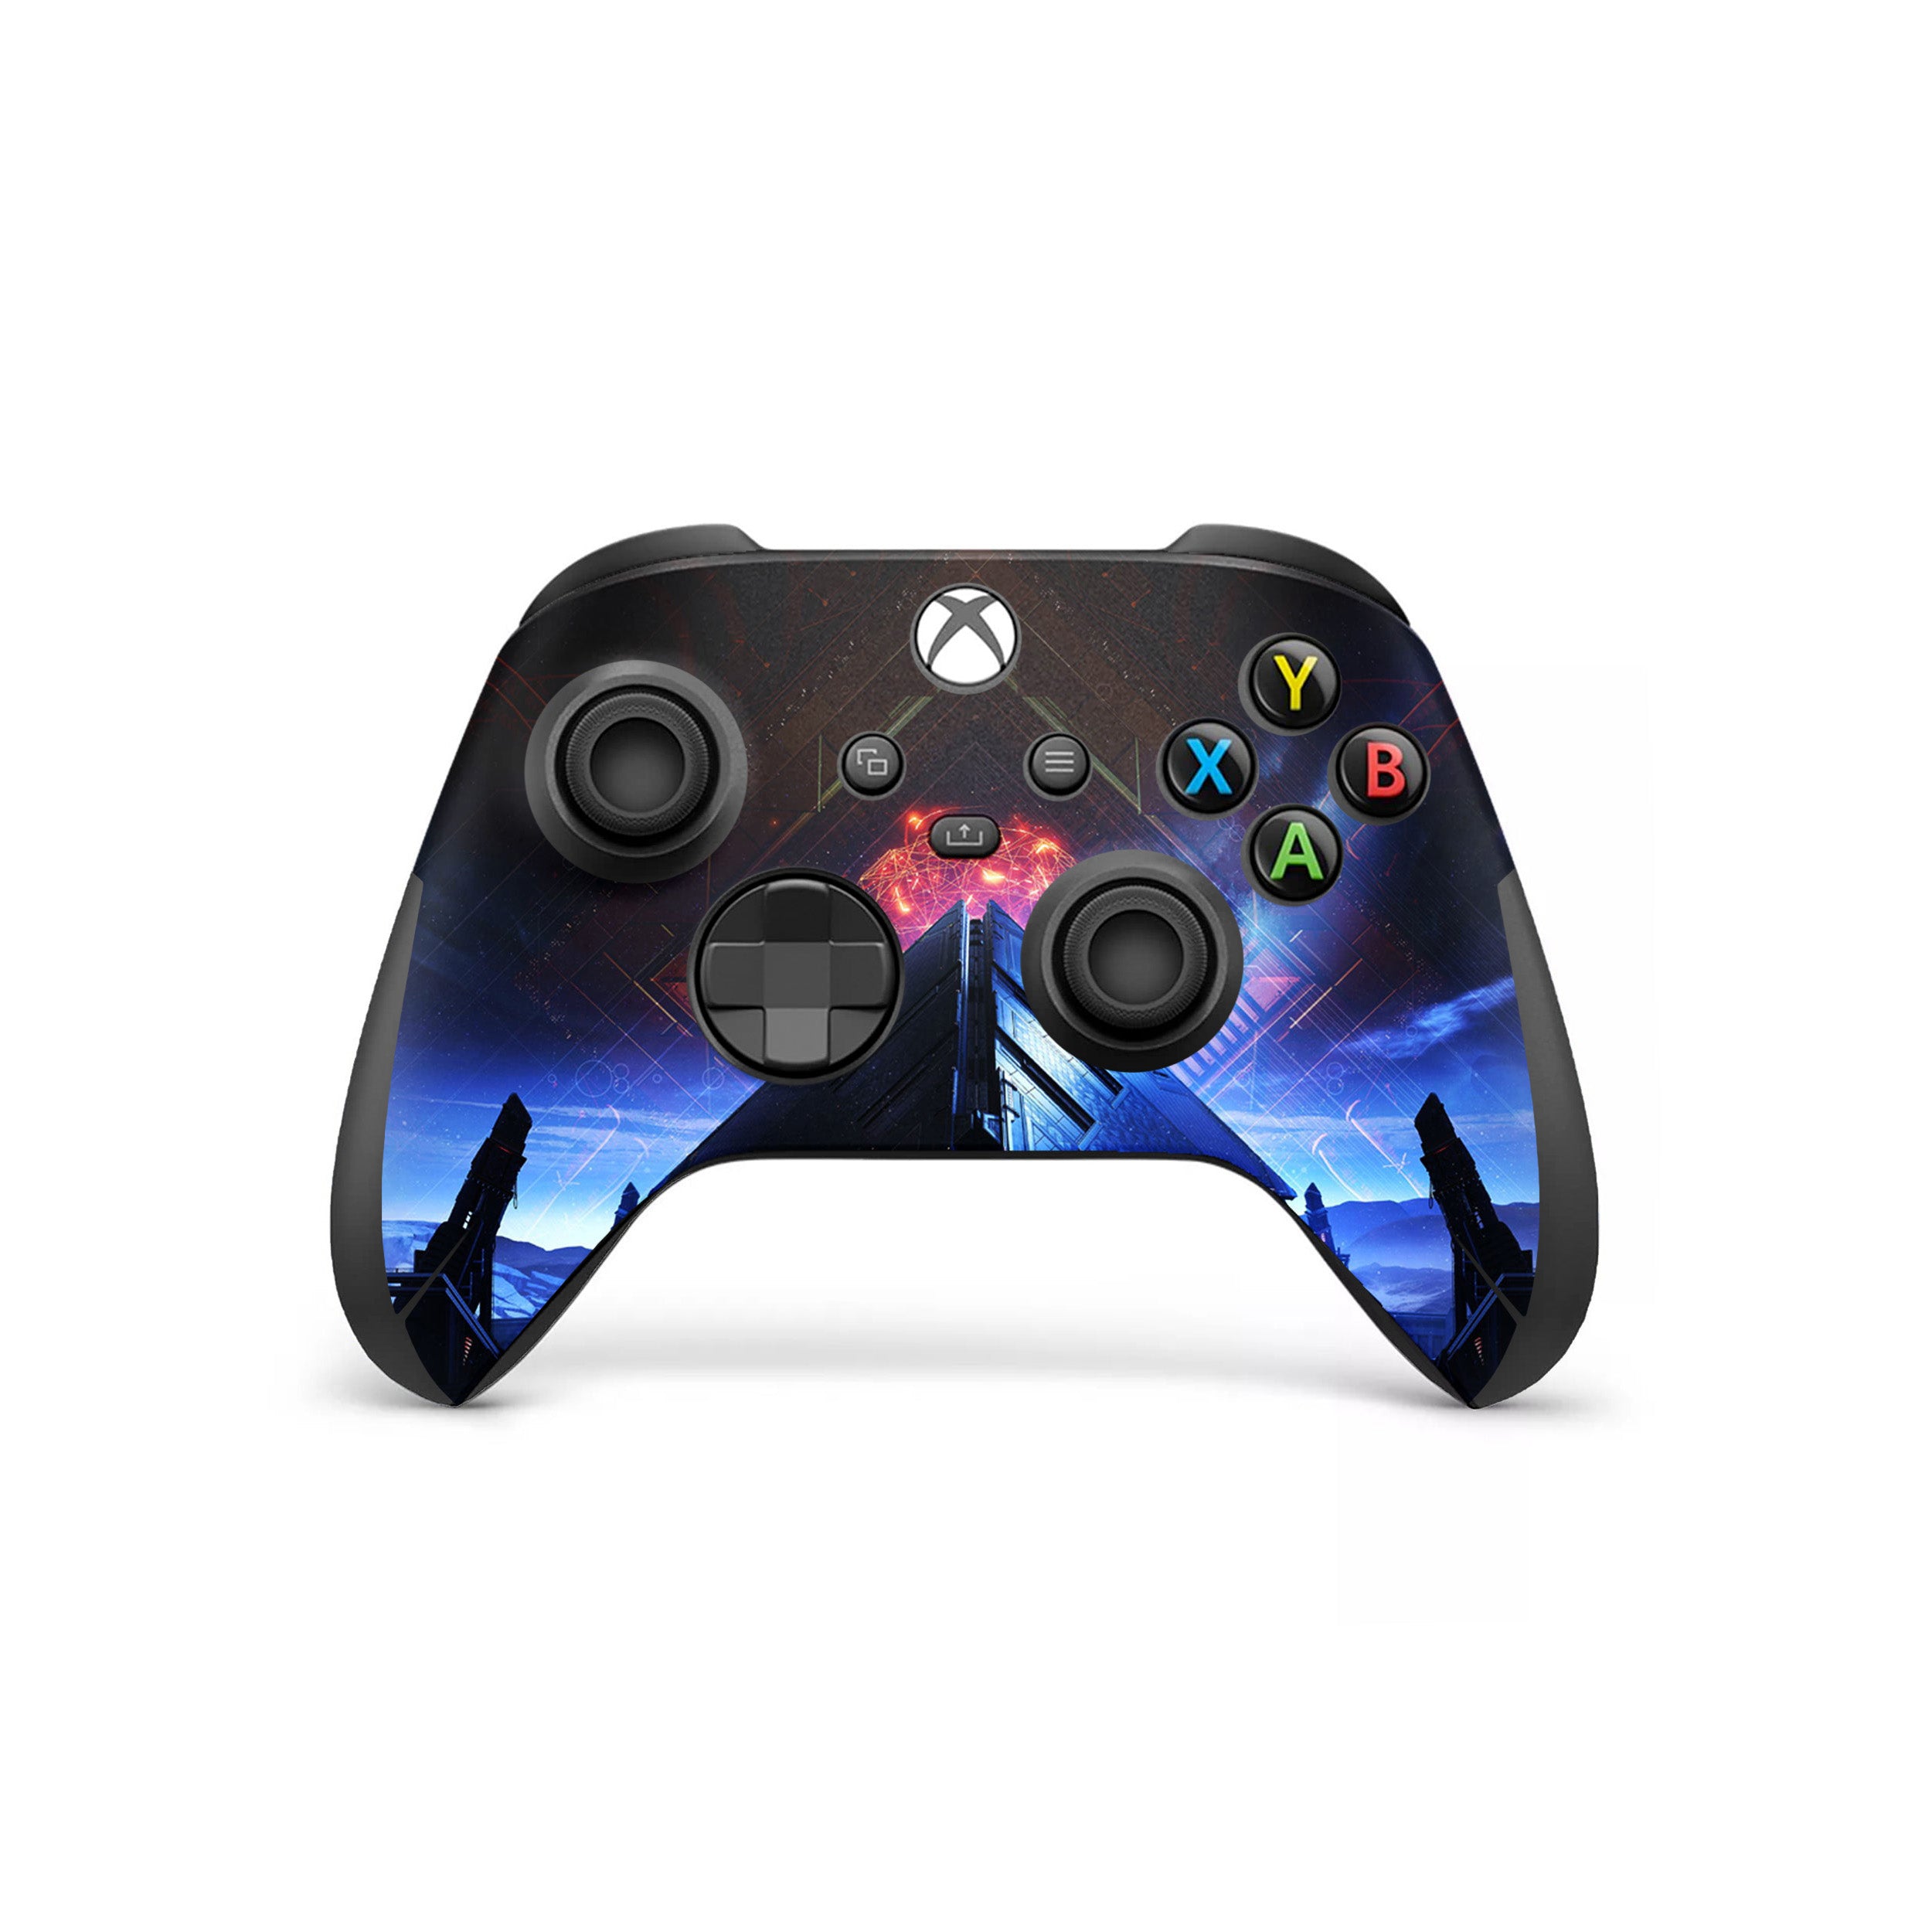 A video game skin featuring a Destiny 2 design for the Xbox Wireless Controller.